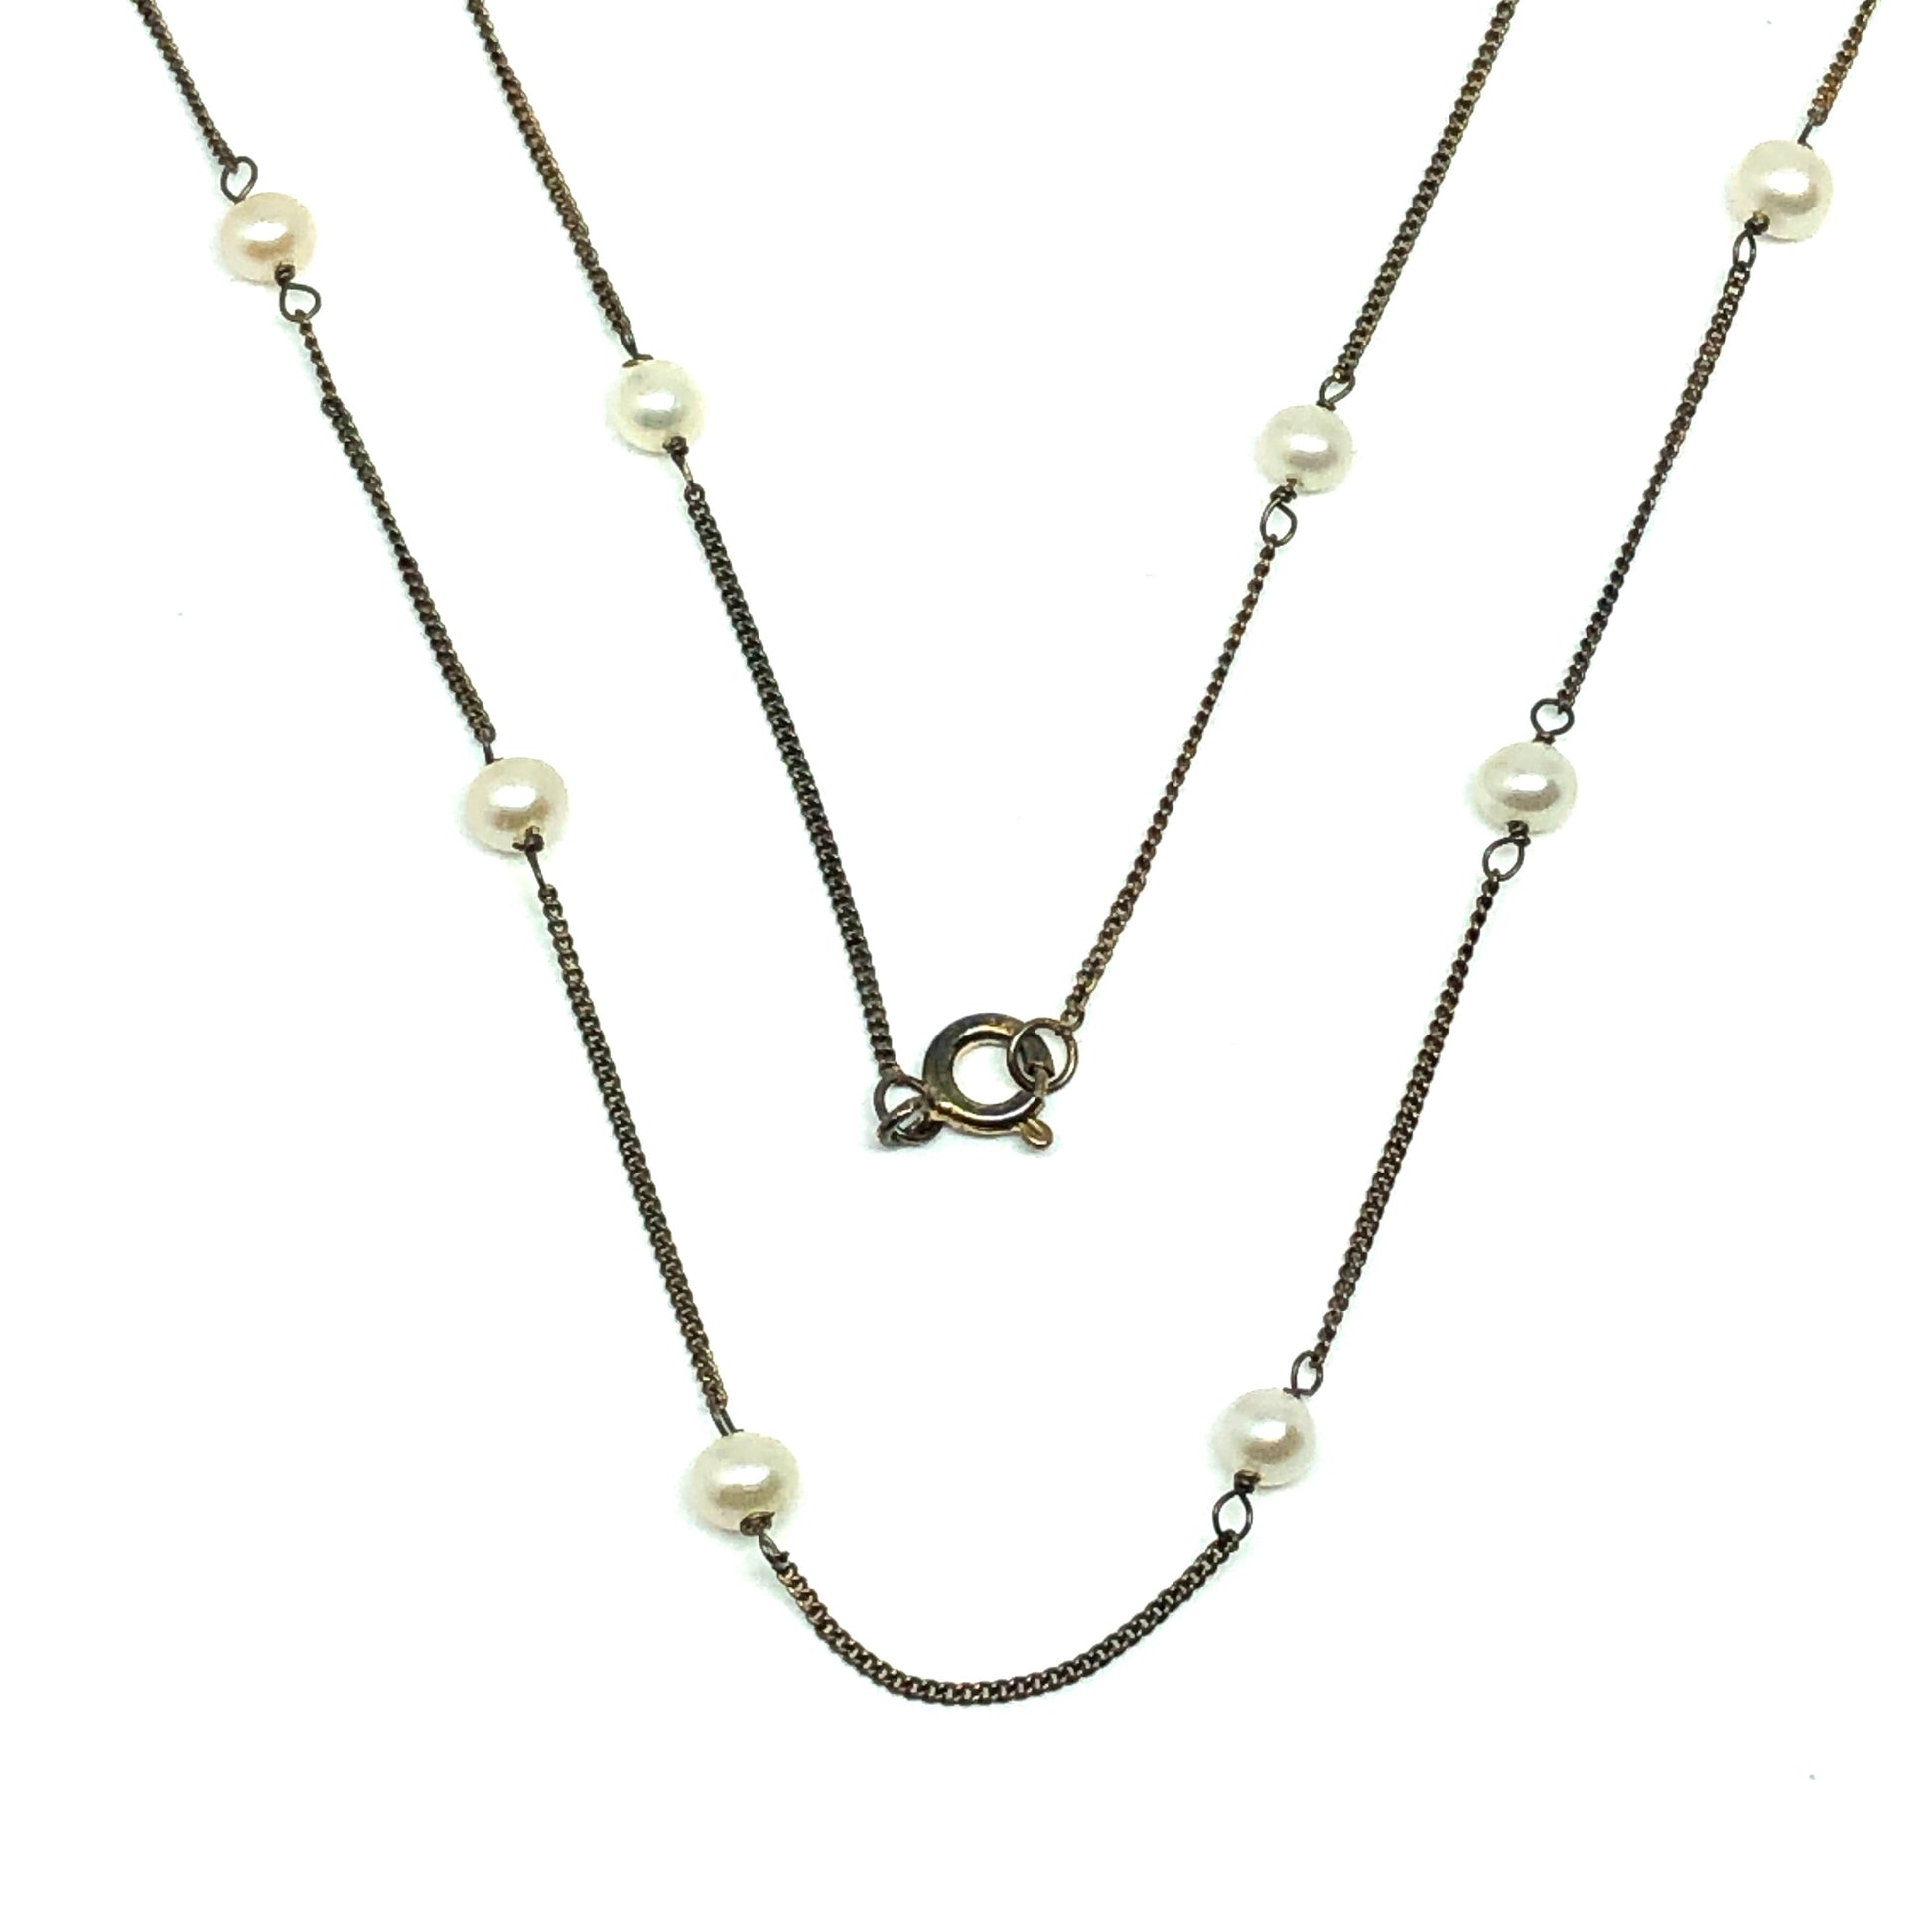 32" Oxidized Antiqued Gold Sterling Silver Rustic Pearl Station Necklace Womens